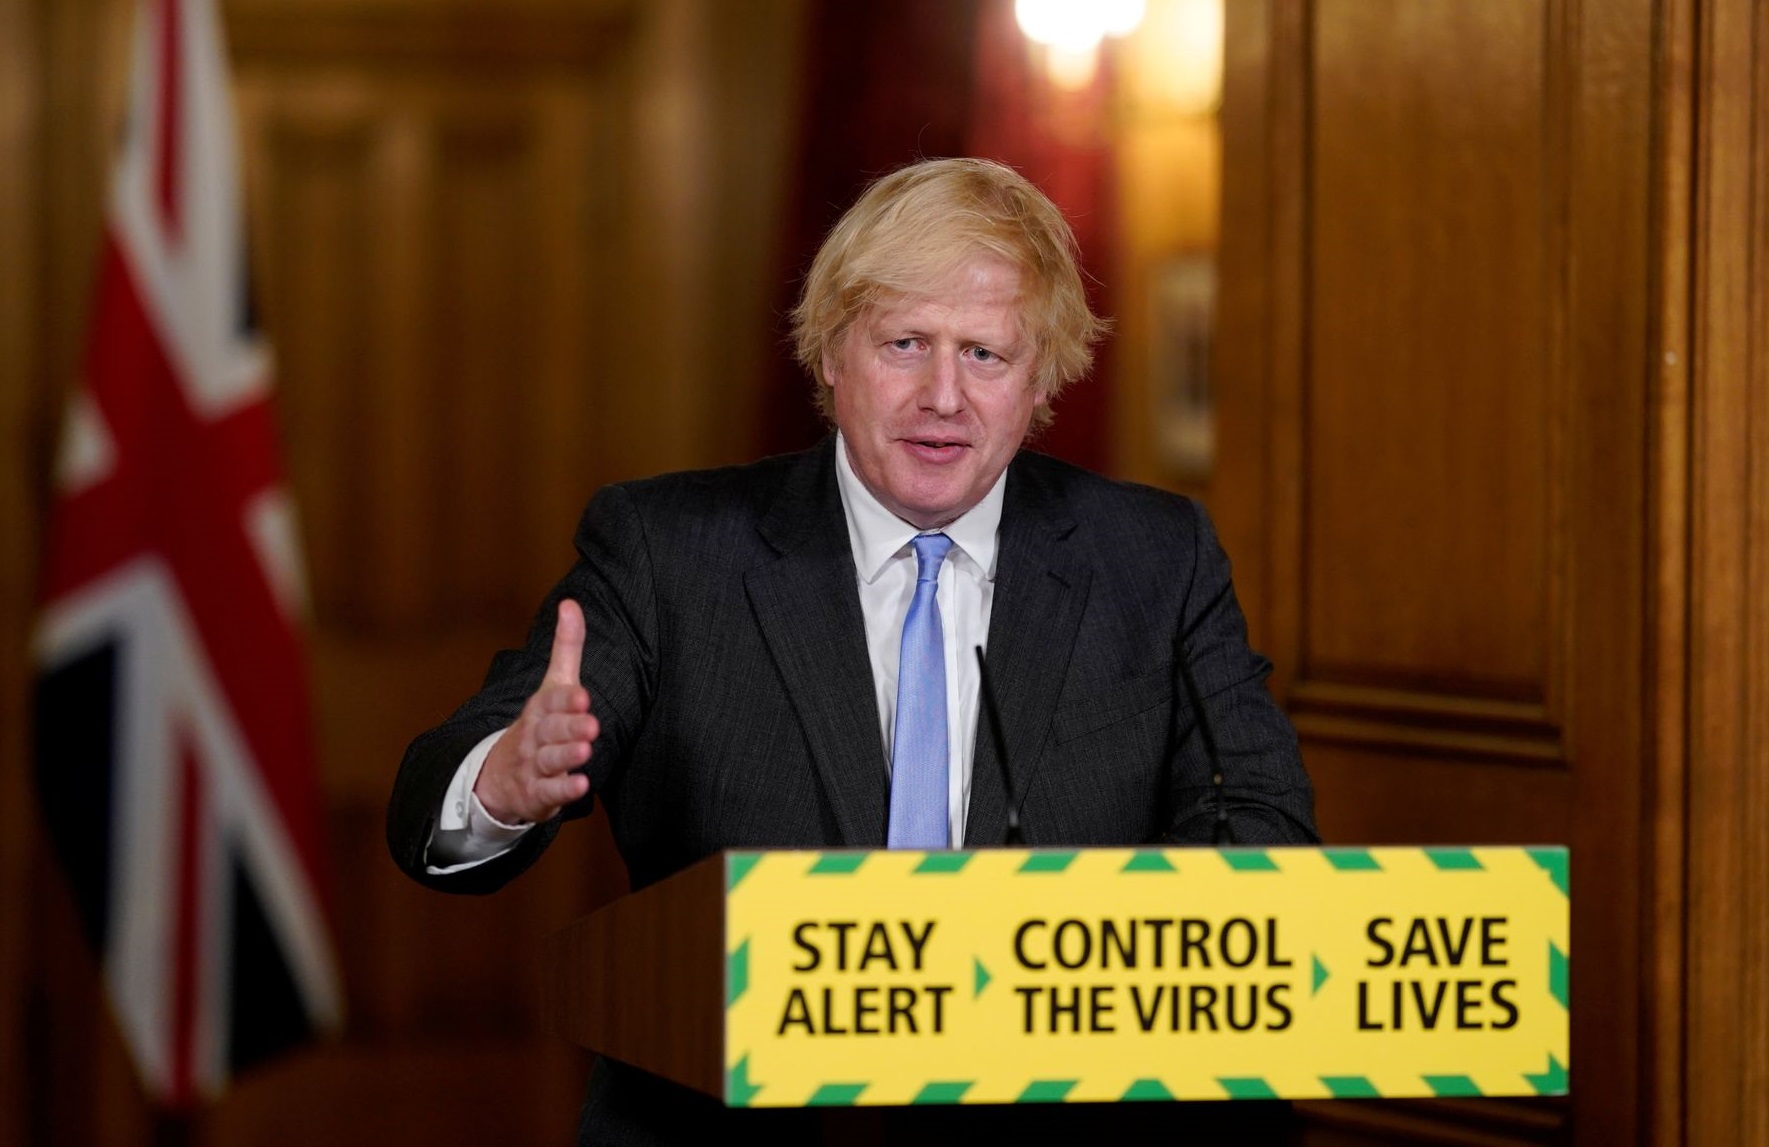 Johnson Pledges to Retain ‘Tough COVID Policy at Our Borders’